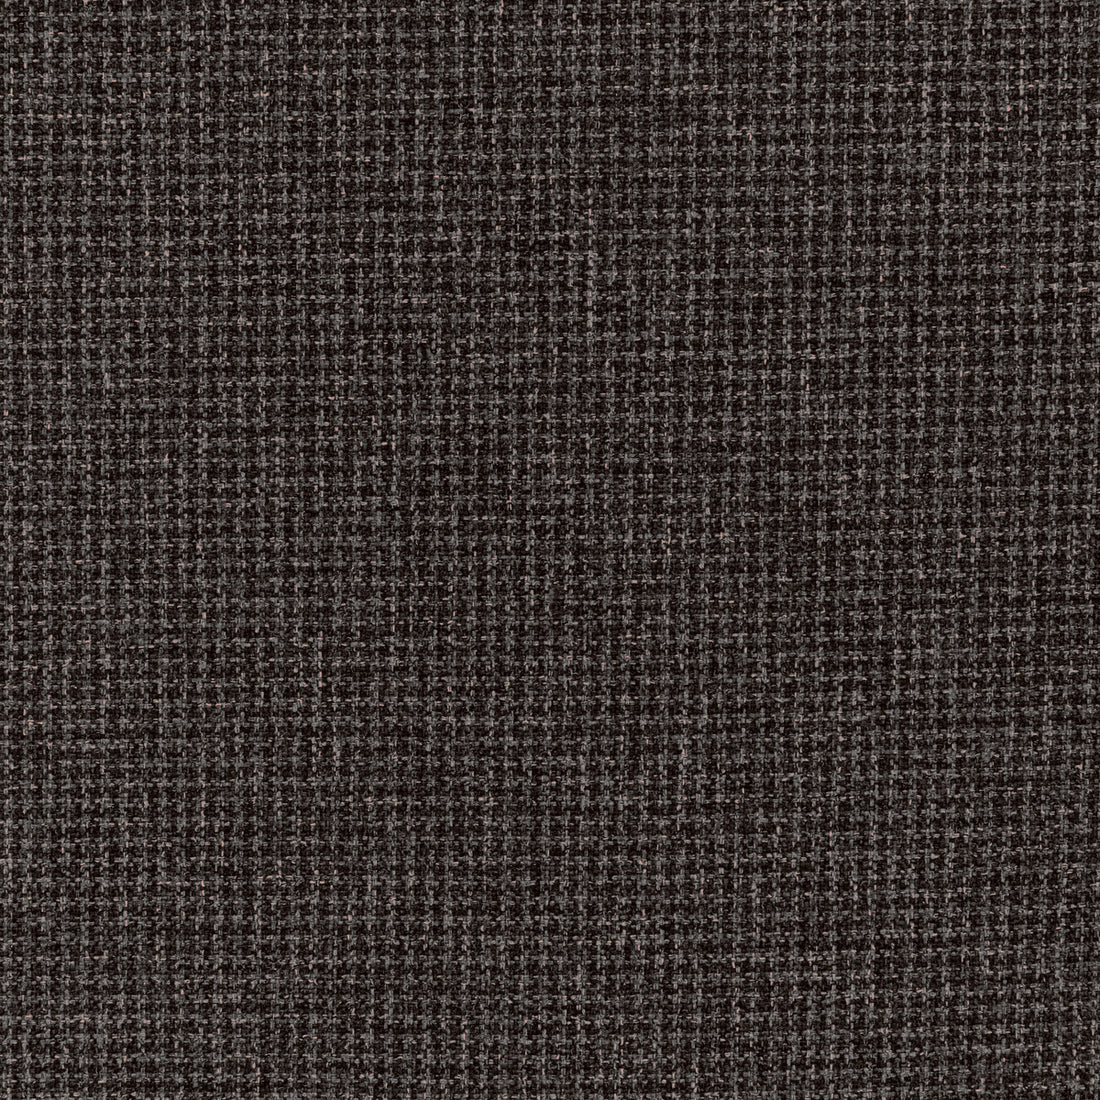 Steamboat fabric in truffle color - pattern 36258.66.0 - by Kravet Contract in the Supreen collection